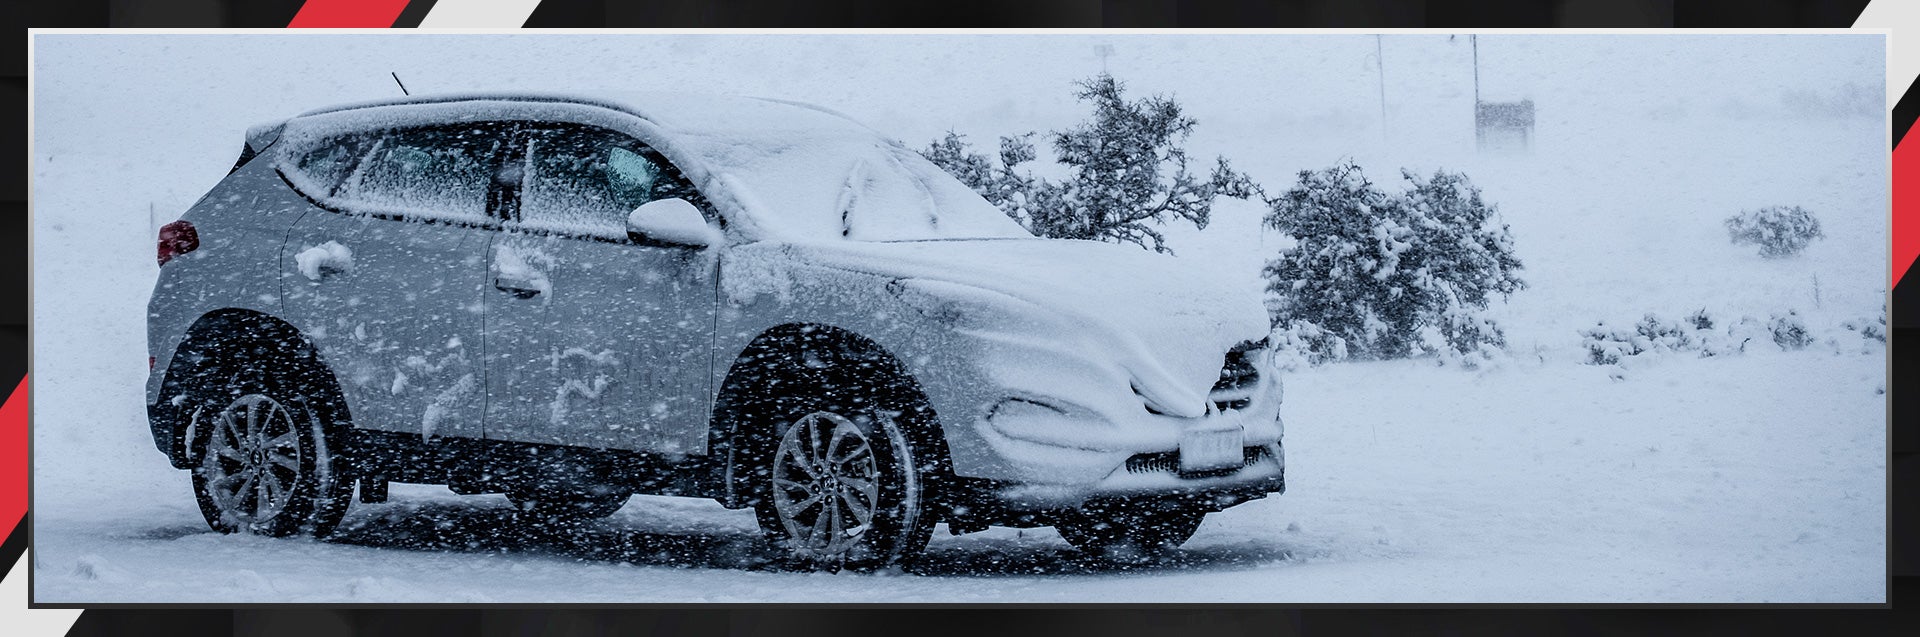 Can Snow Cause Damage to Your Car?